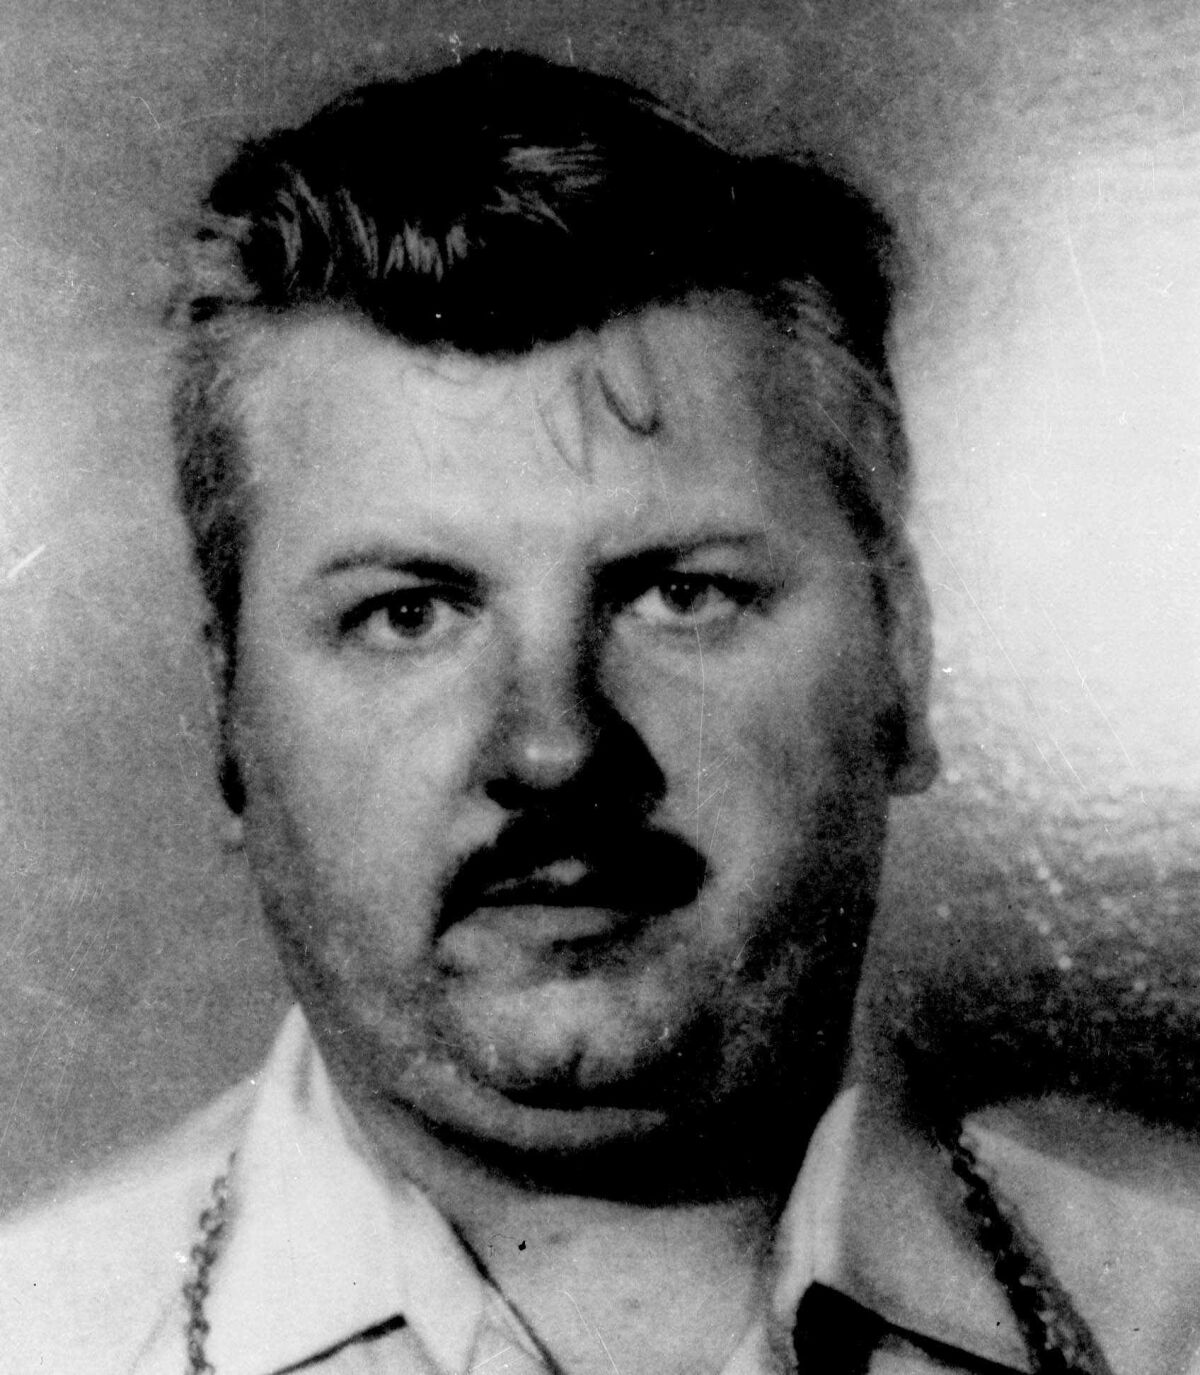 A black-and-white mug shot of a man with a mustache